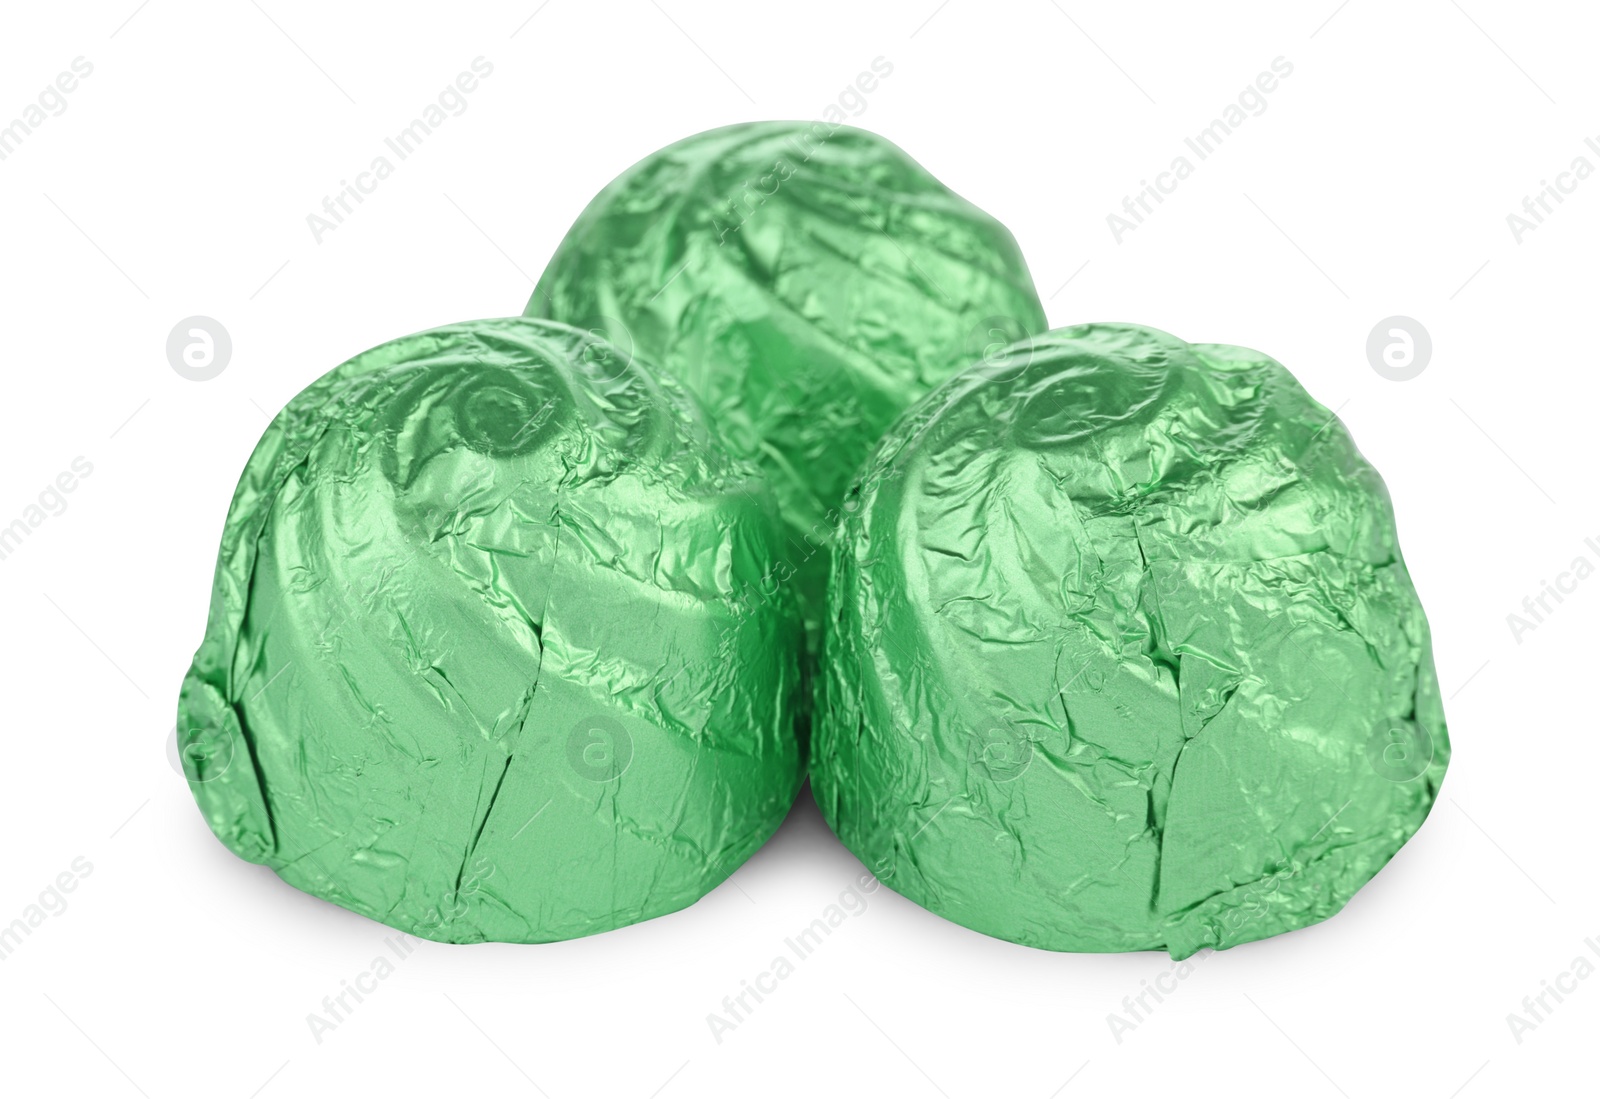 Photo of Candies in light green wrappers isolated on white